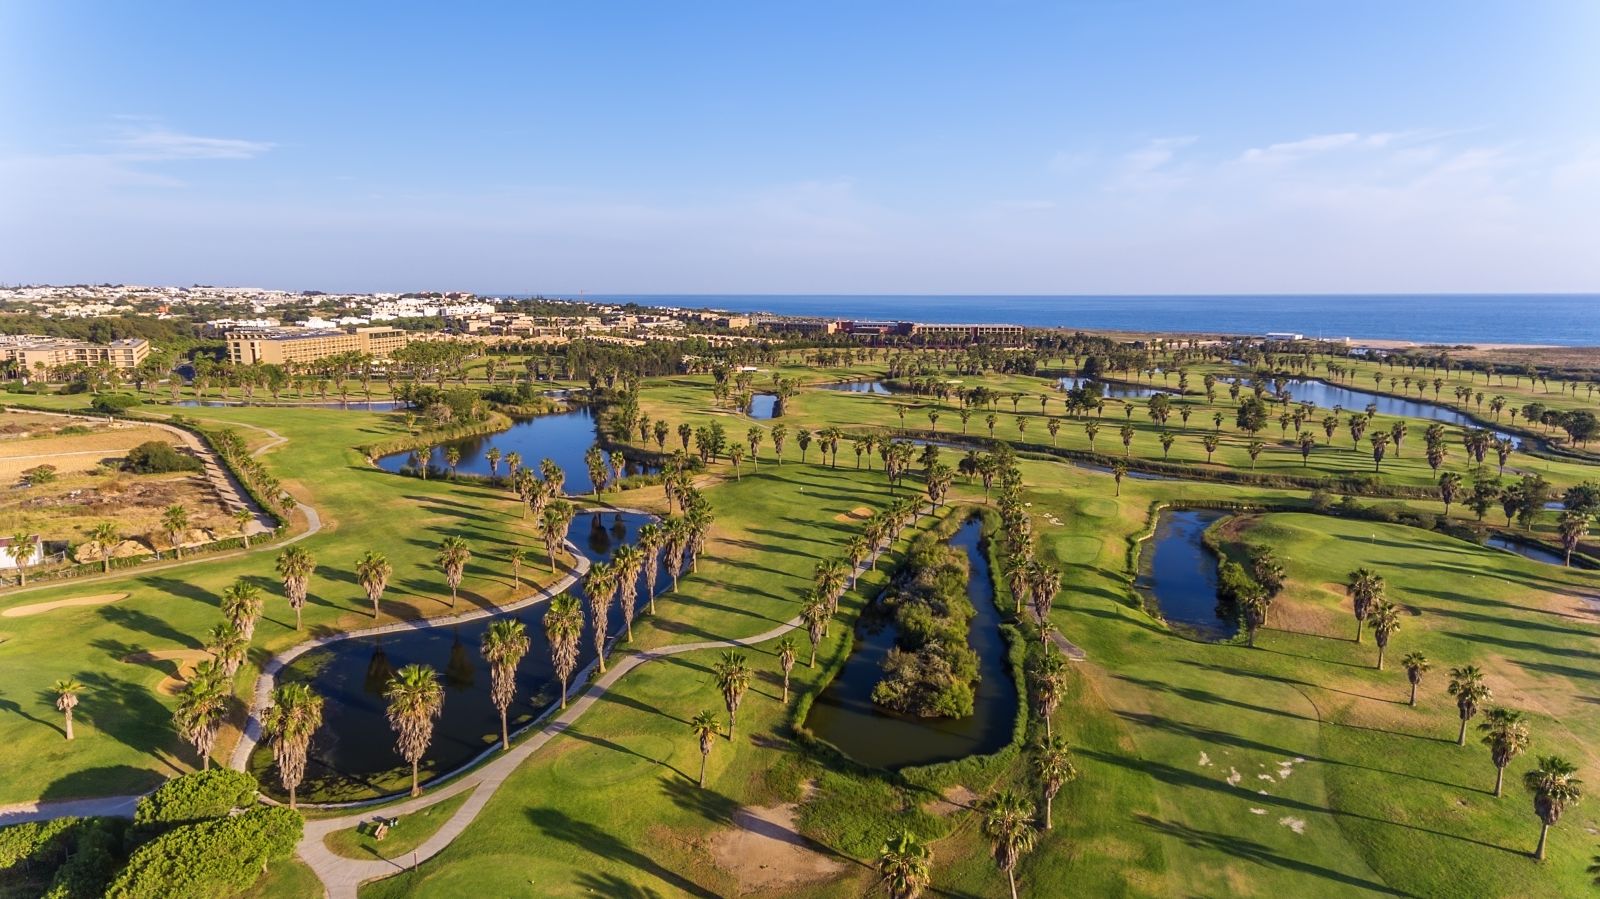 Golf resort at the Algarve, south of Portugal